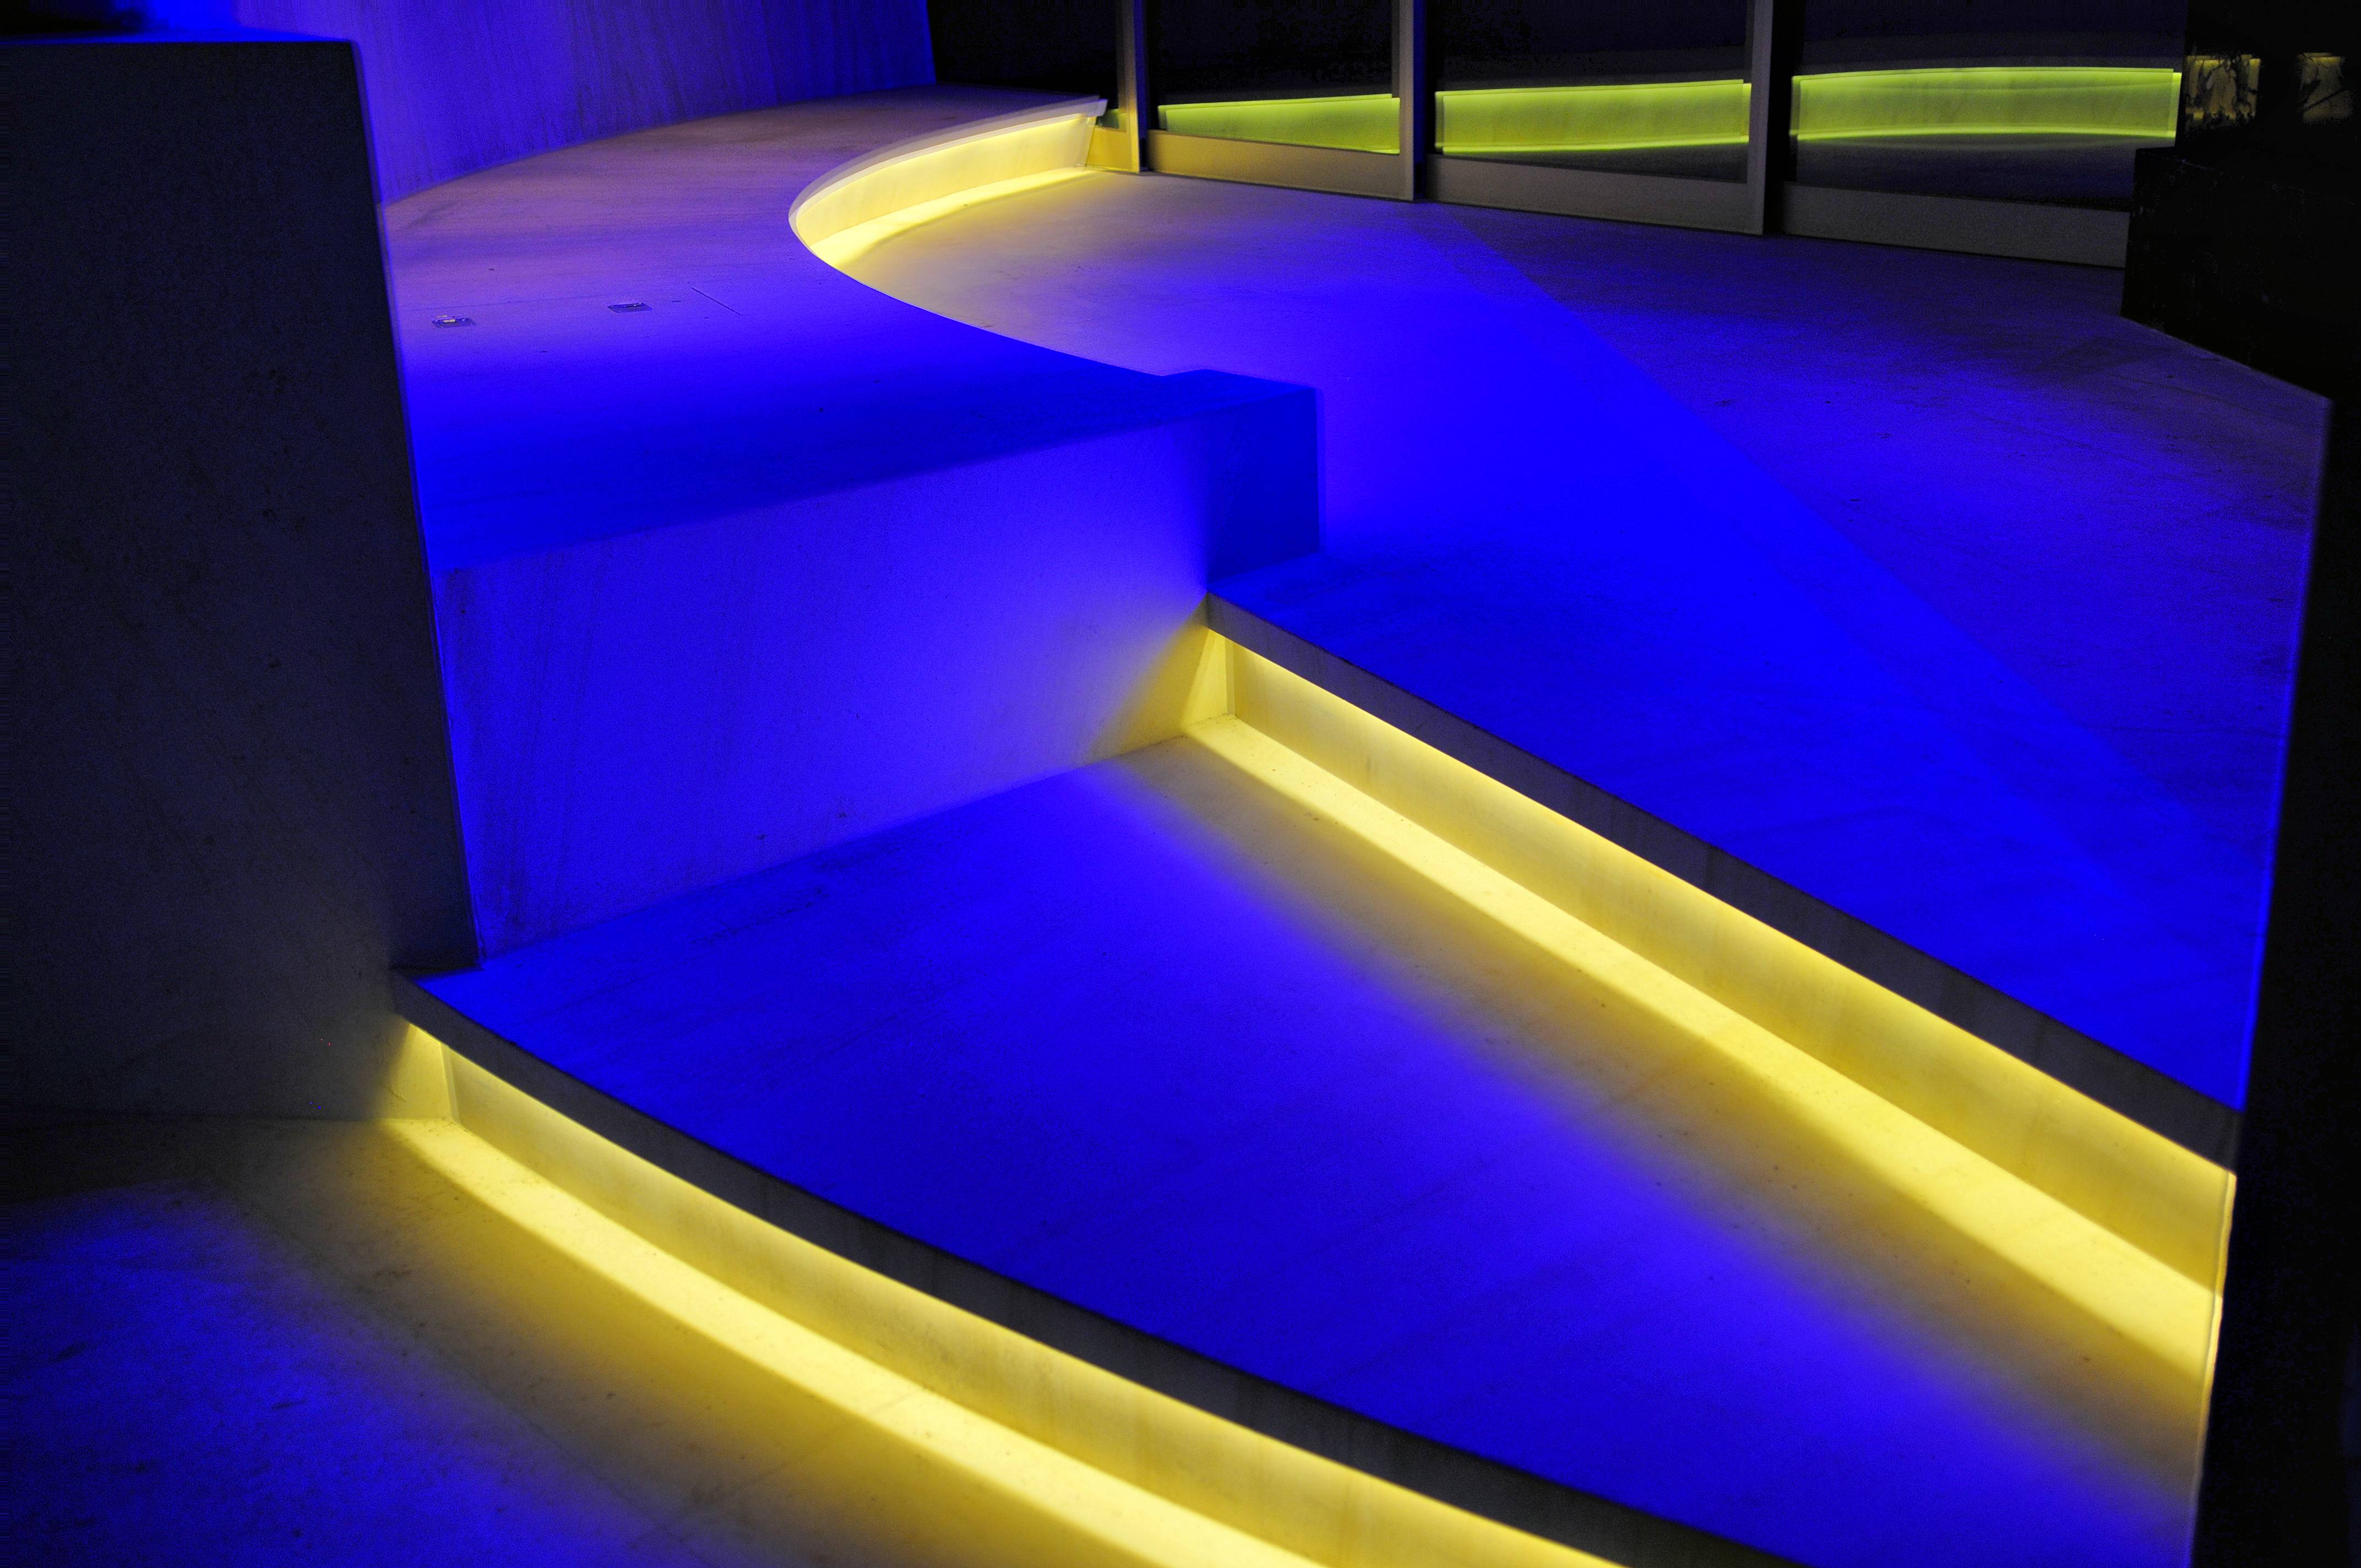 Stairwell lit by colored LED lights